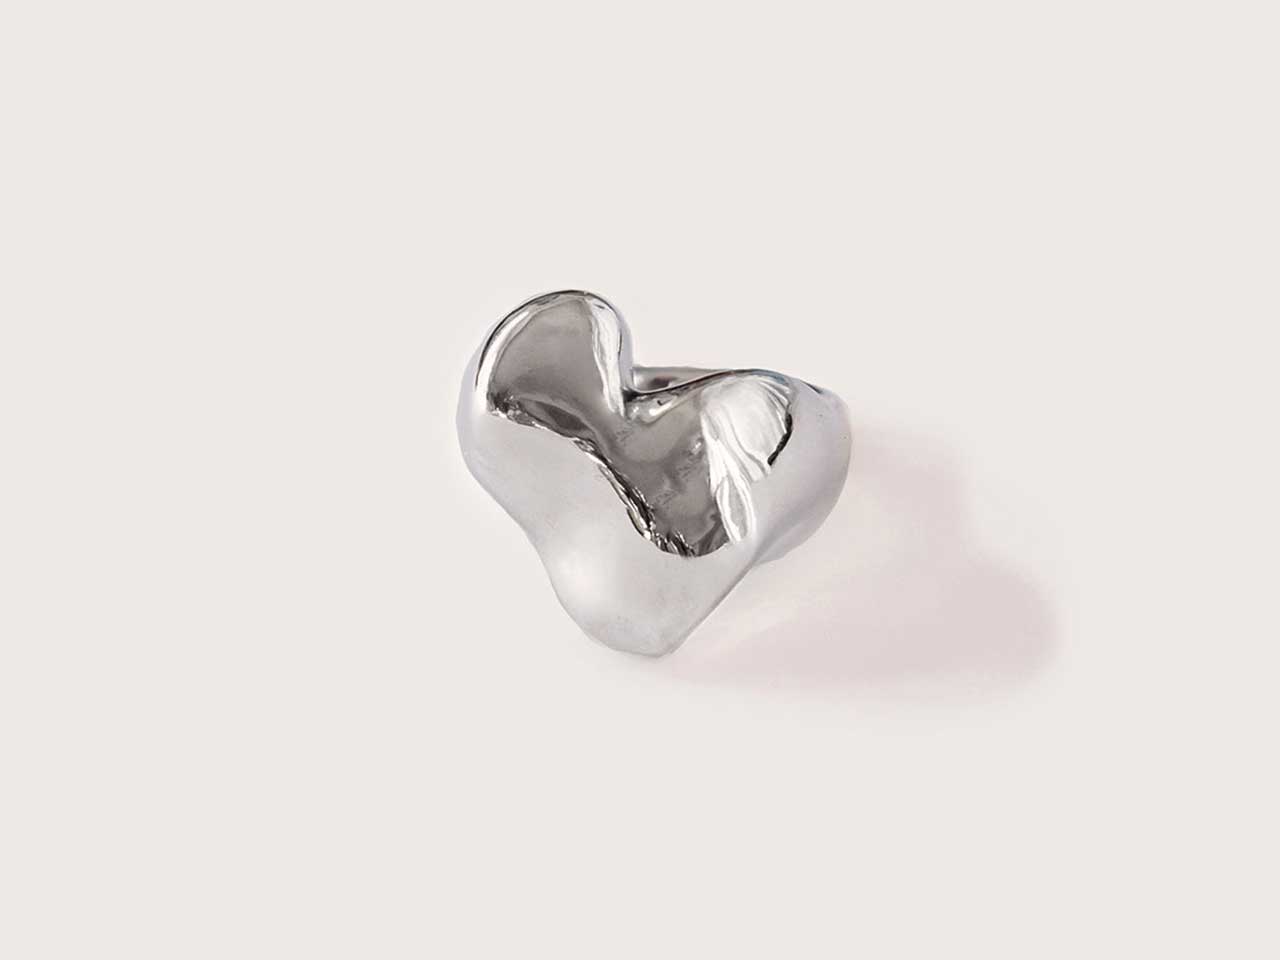 A silver jewellery ring from Canadian brand Vimeria.